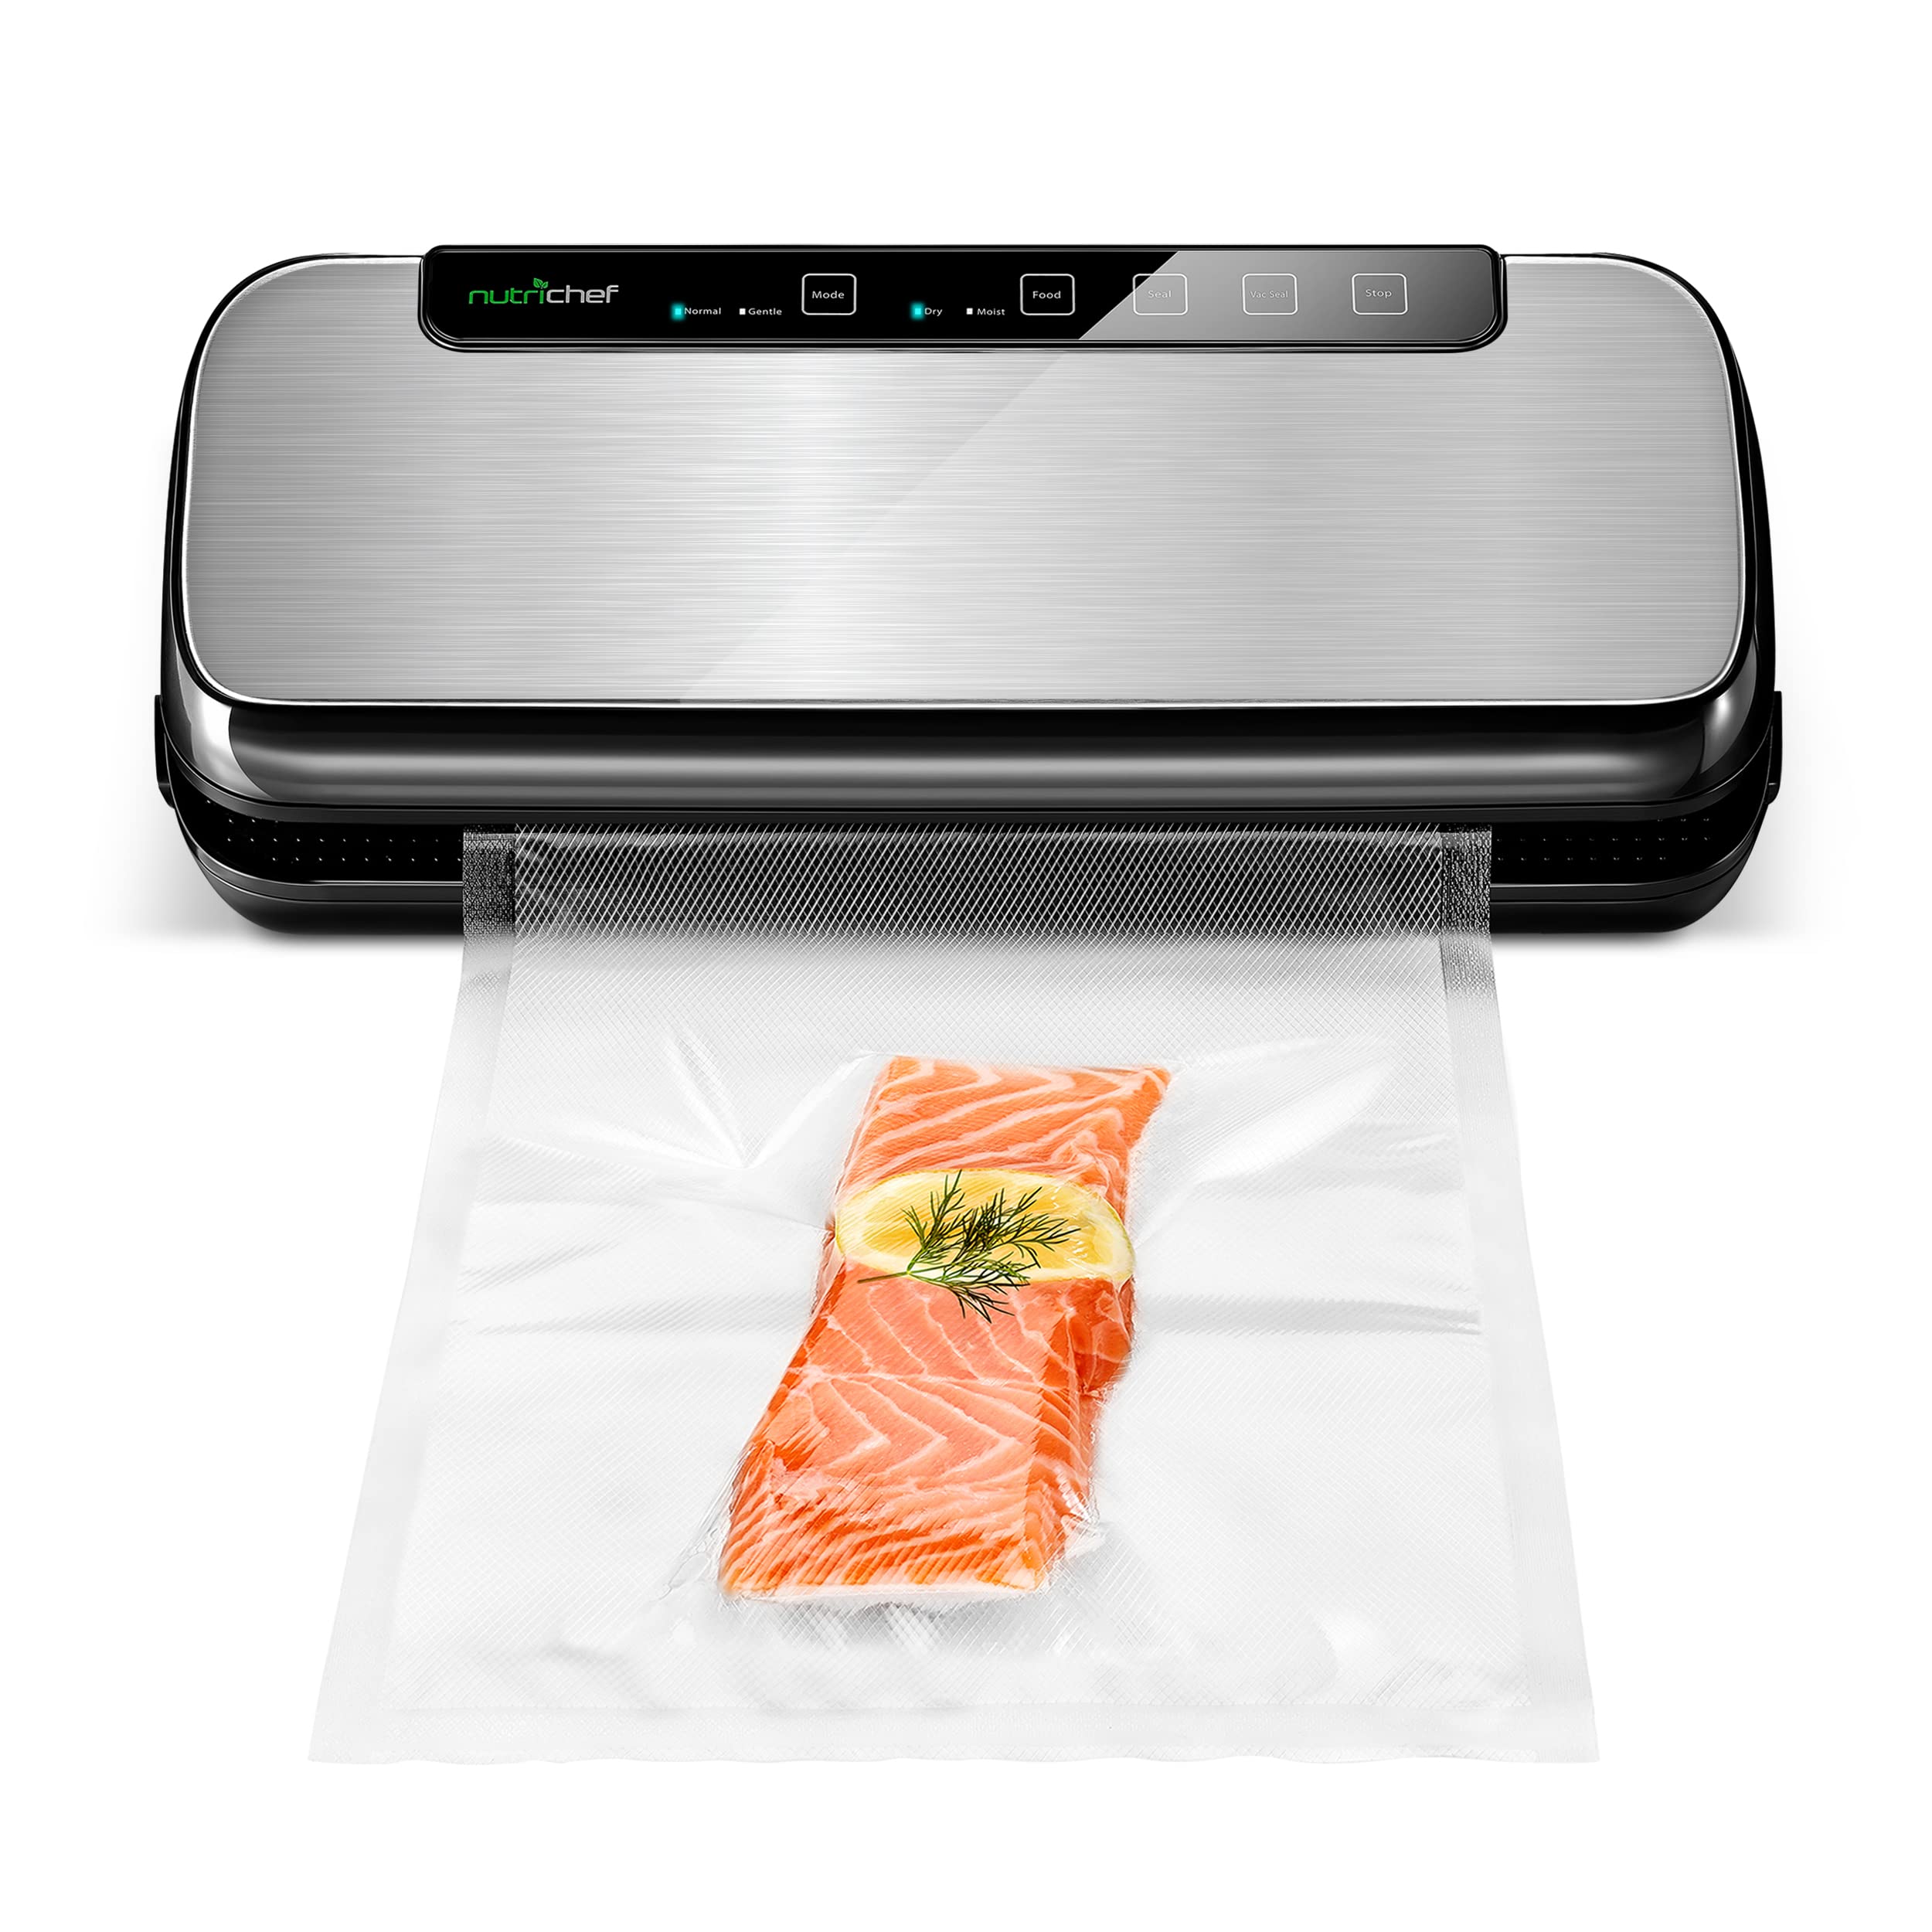 NutriChef PKVS Sealer | Automatic Vacuum Air Sealing System Preservation w/Starter Kit | Compact Design | Lab Tested | Dry & Moist Food Modes | Led Indicator Lights, 12